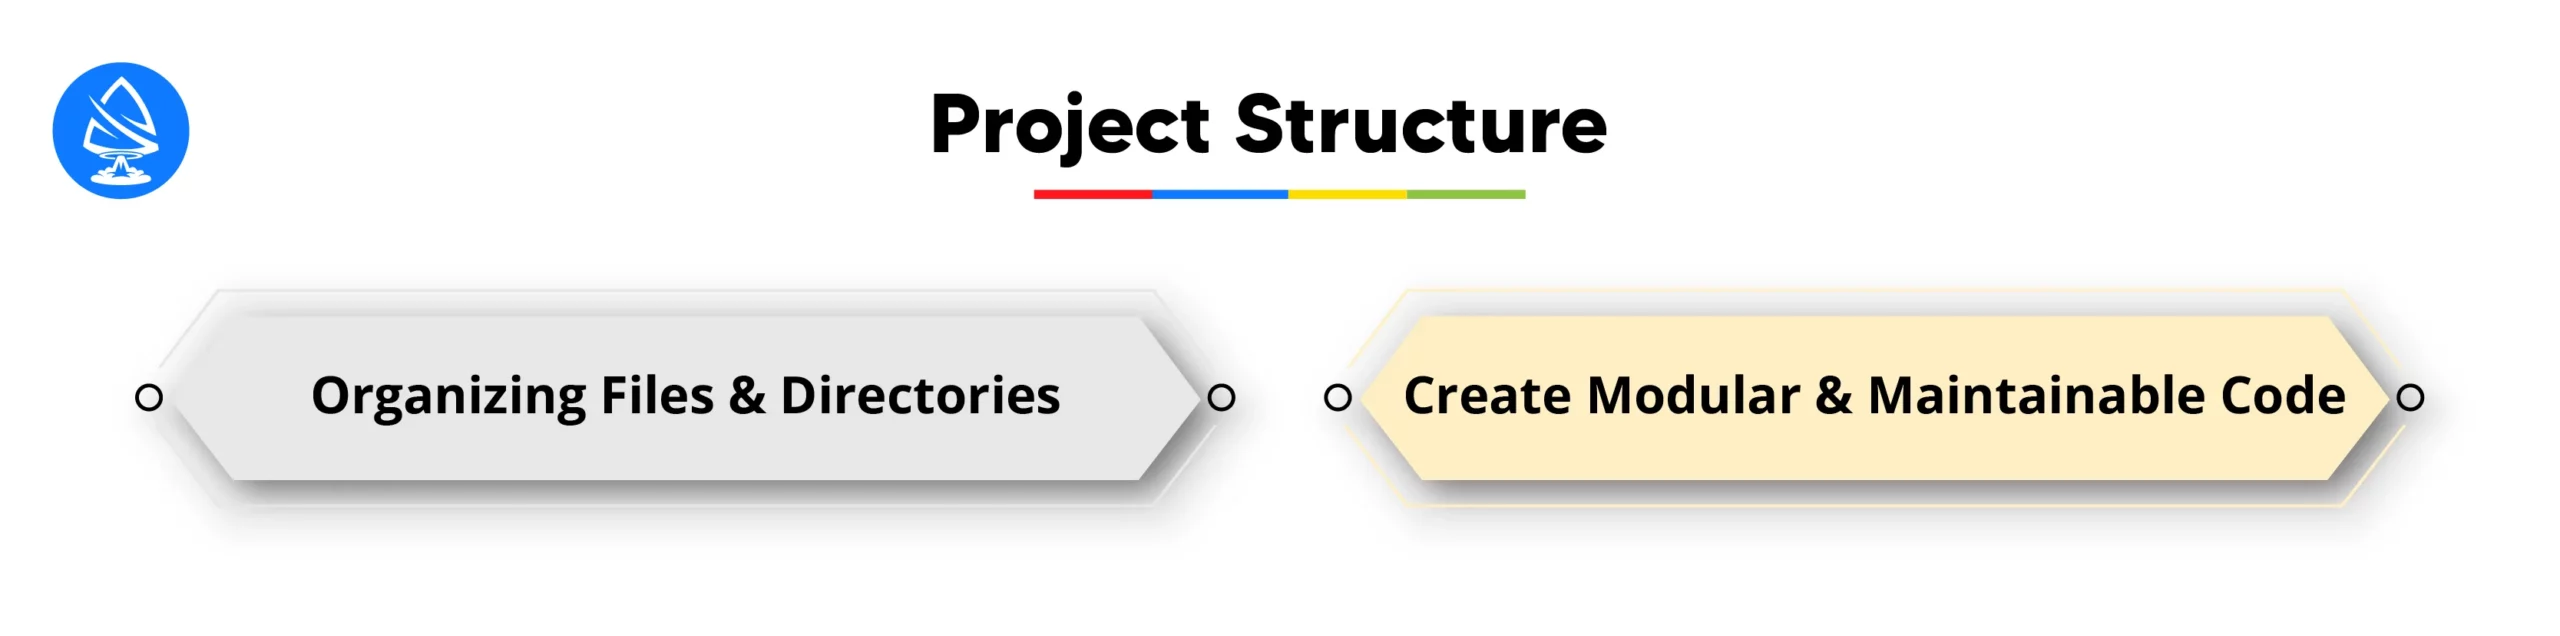 Project Structure 